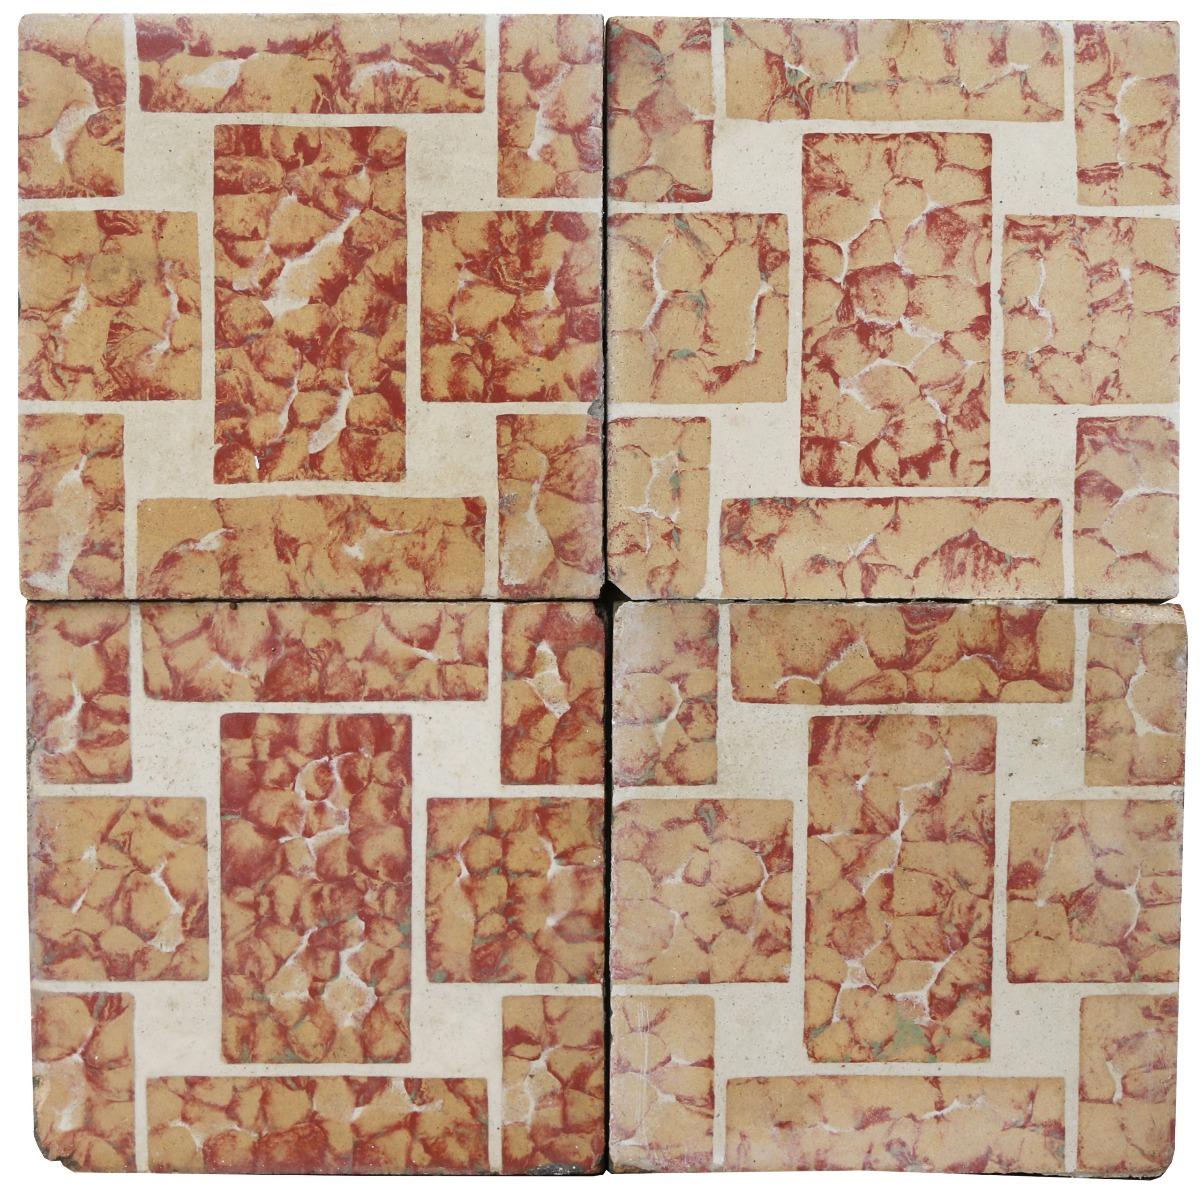 A batch of 190 reclaimed encaustic cement floor tiles. These tiles will cover 7.6 m2 or 81 sq. ft. They are suitable for use on floors or walls.

Weathered surfaces and small chips associated with transport and storage. Good overall condition.